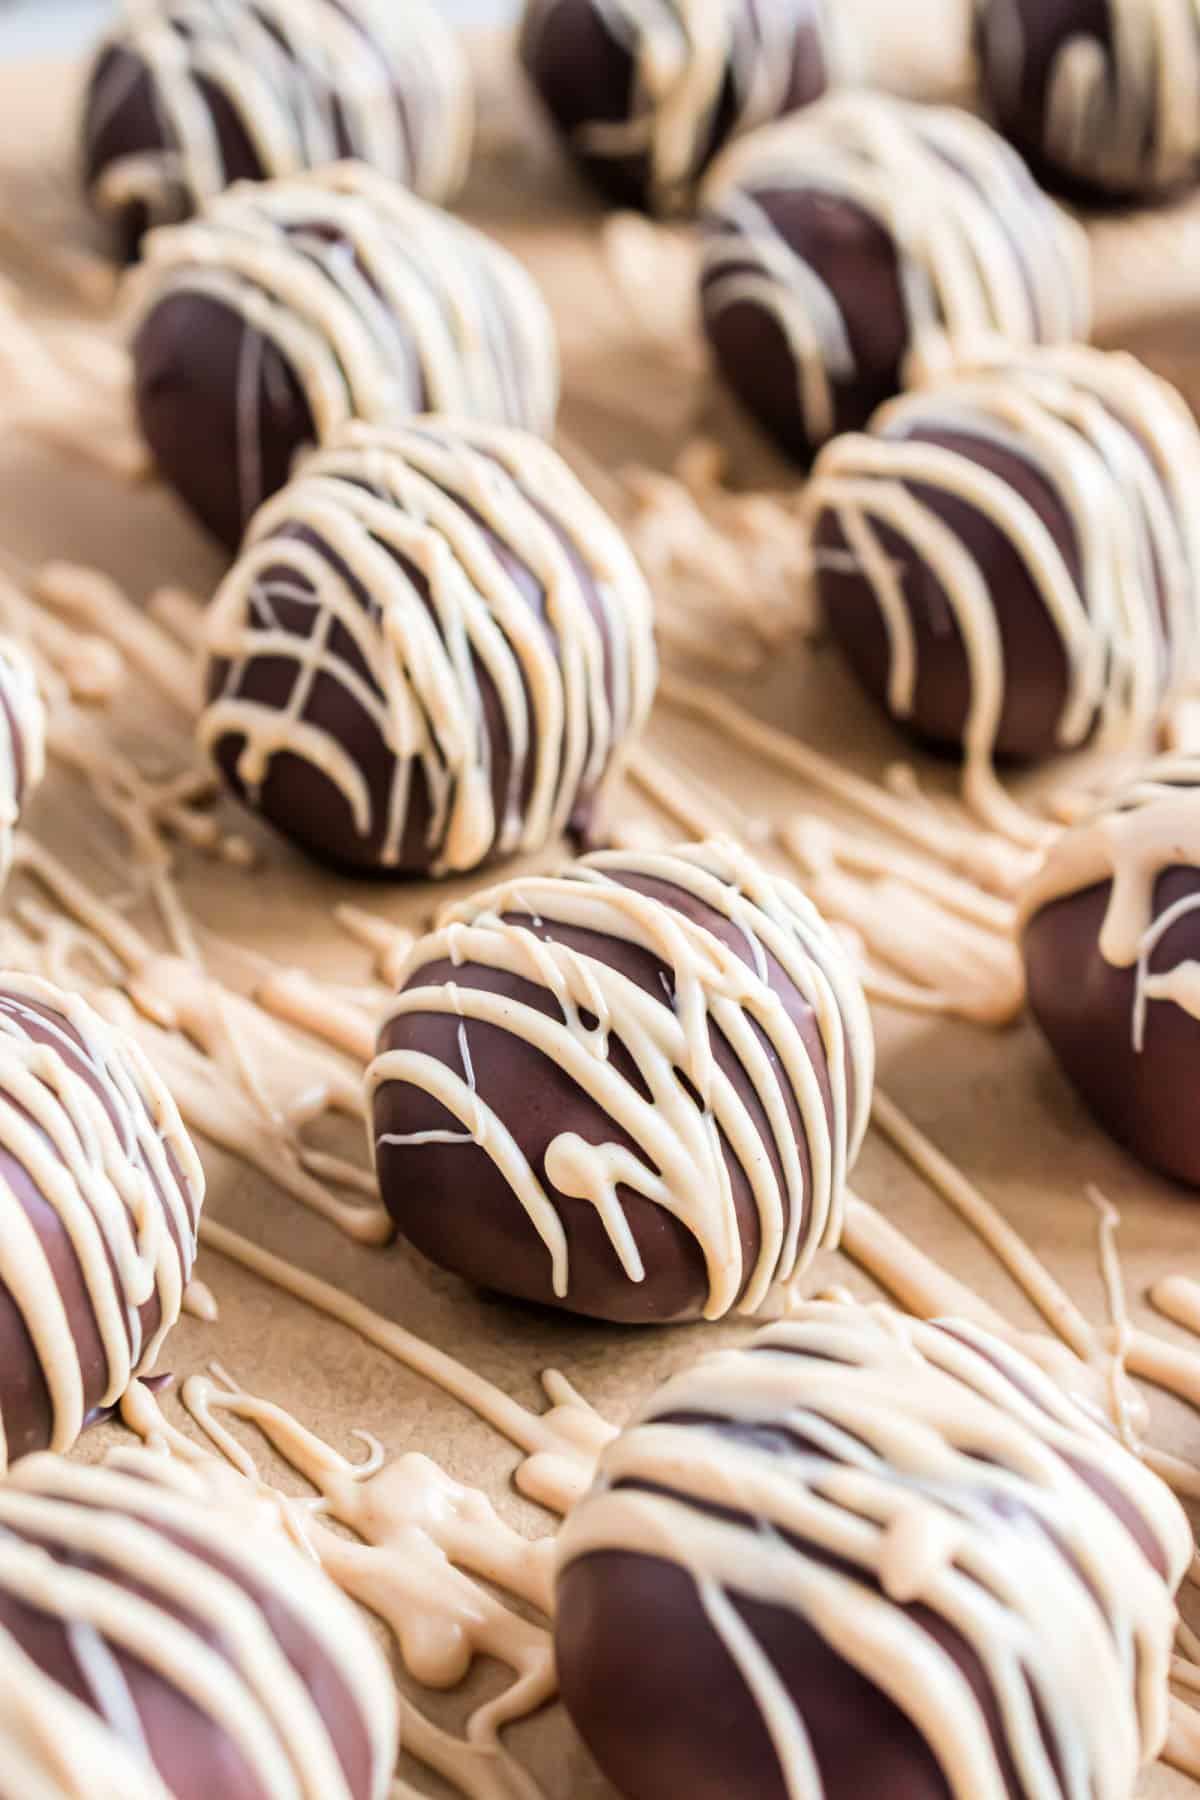 Chocolate truffles drizzled with white chocolate peanut butter.